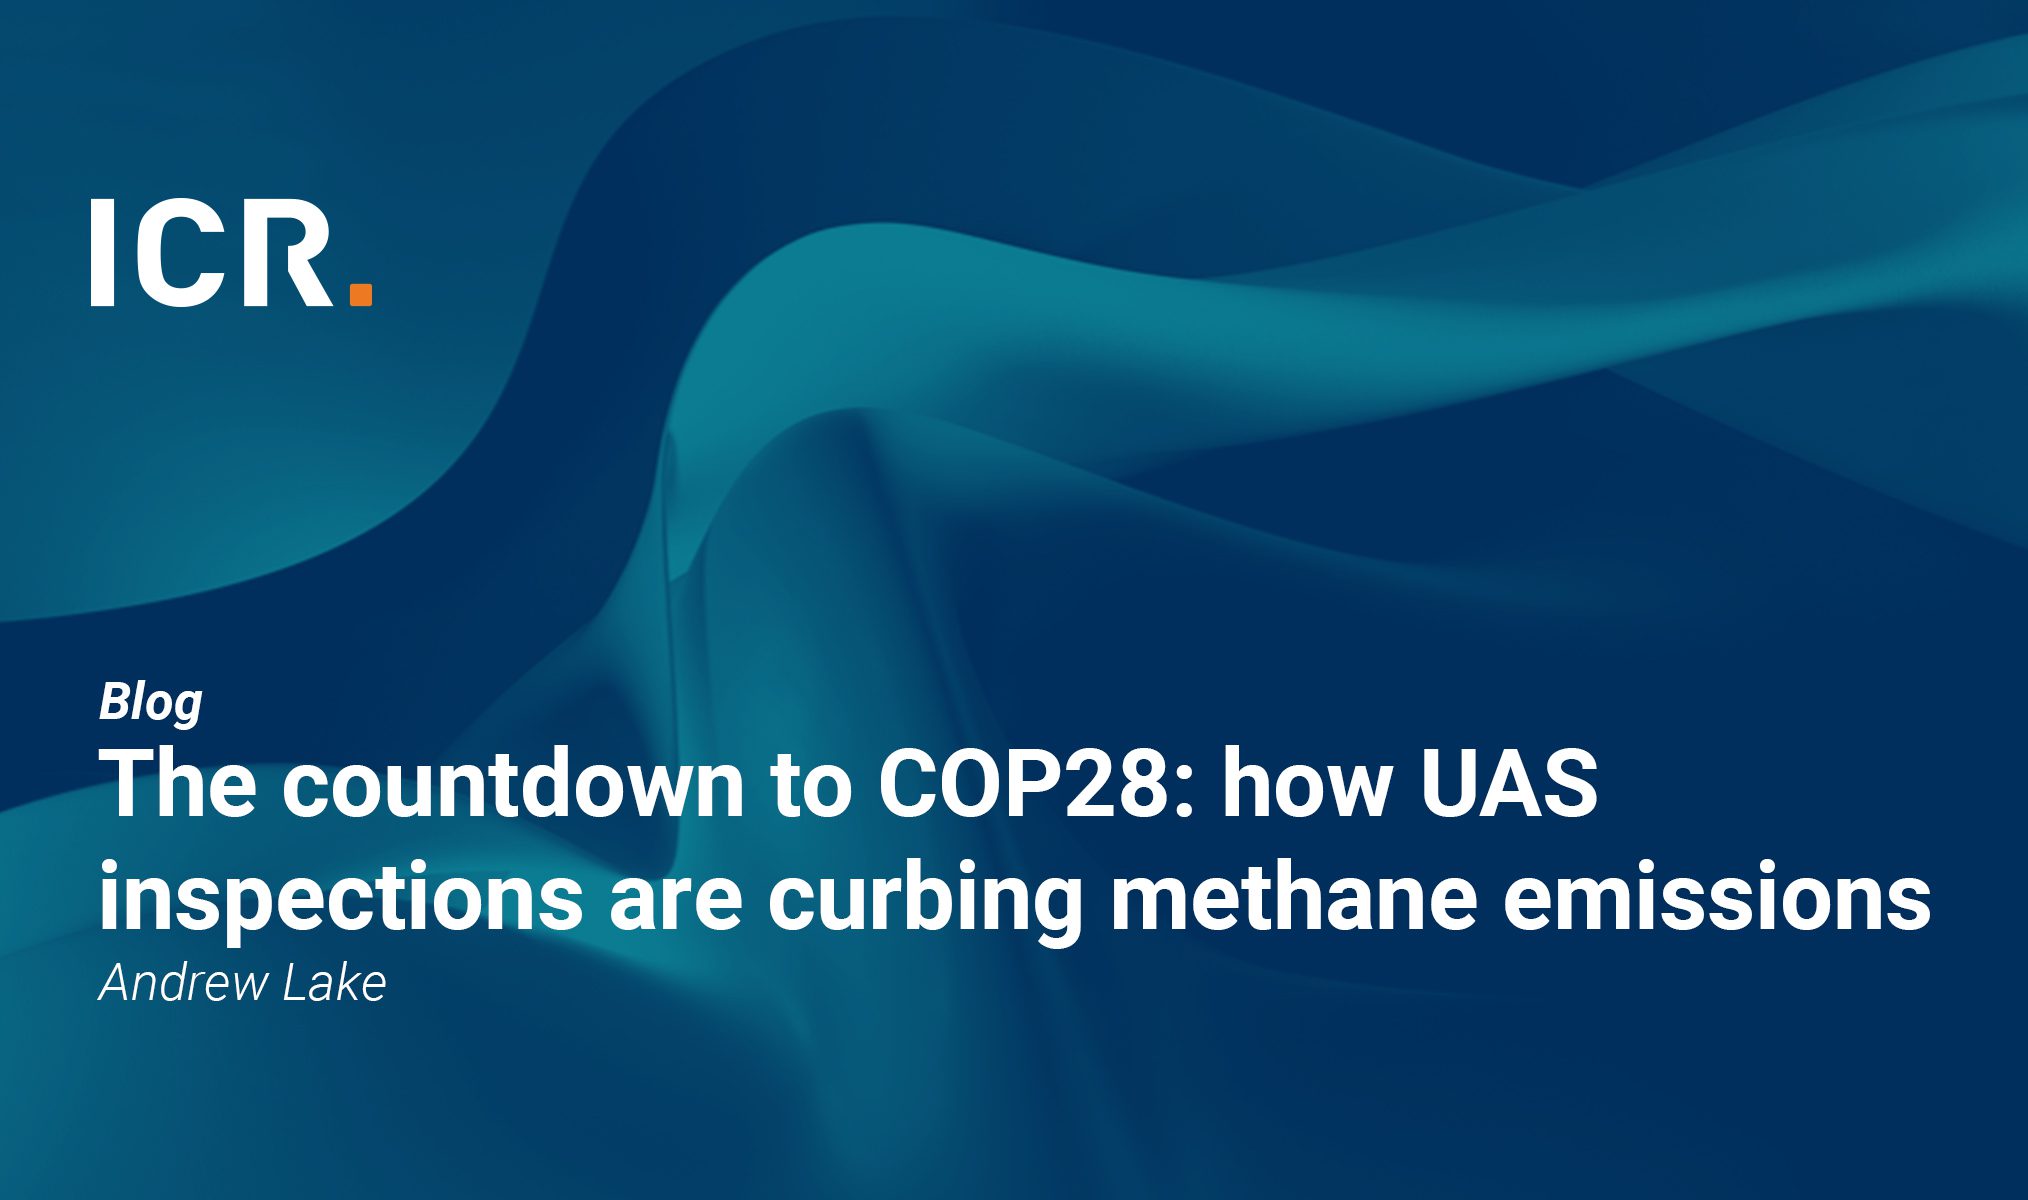 social card for article on UAS Inspections curbing methane emissions